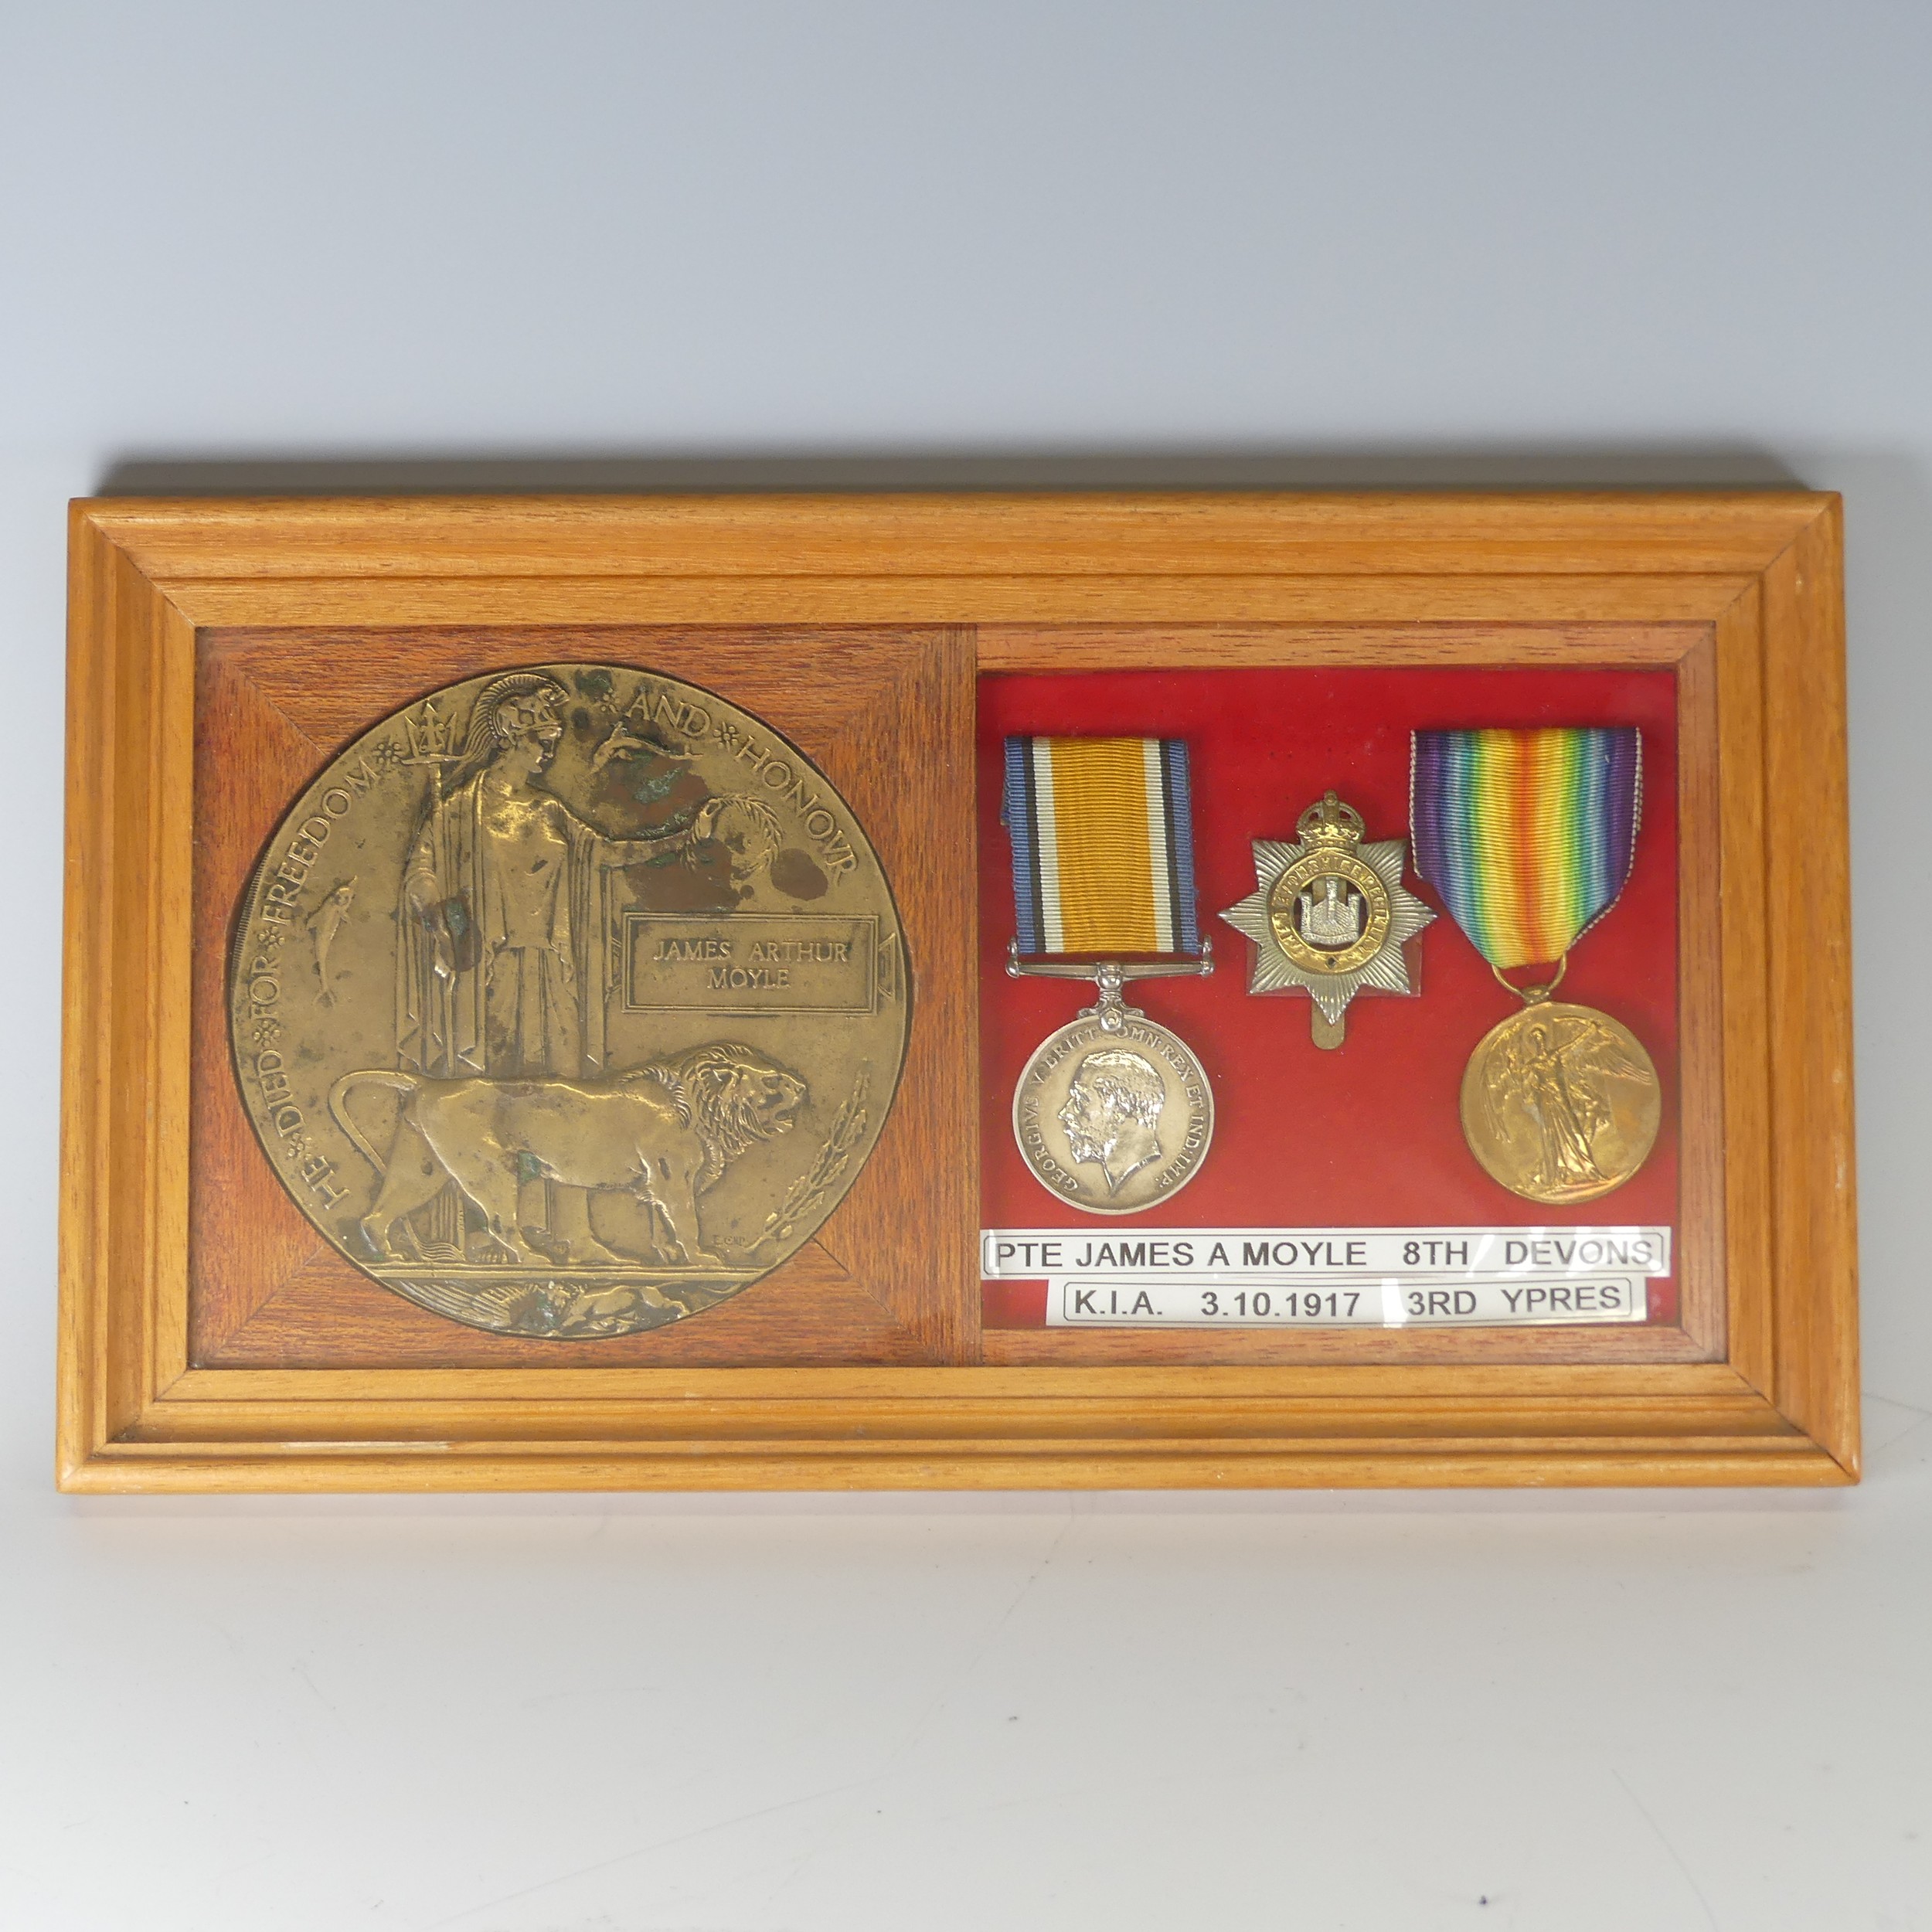 A WW1 Devonshire memorial Plaque 'Death Penny', awarded to the family of 'James Arthur Moyle' K.I.A. - Image 2 of 3